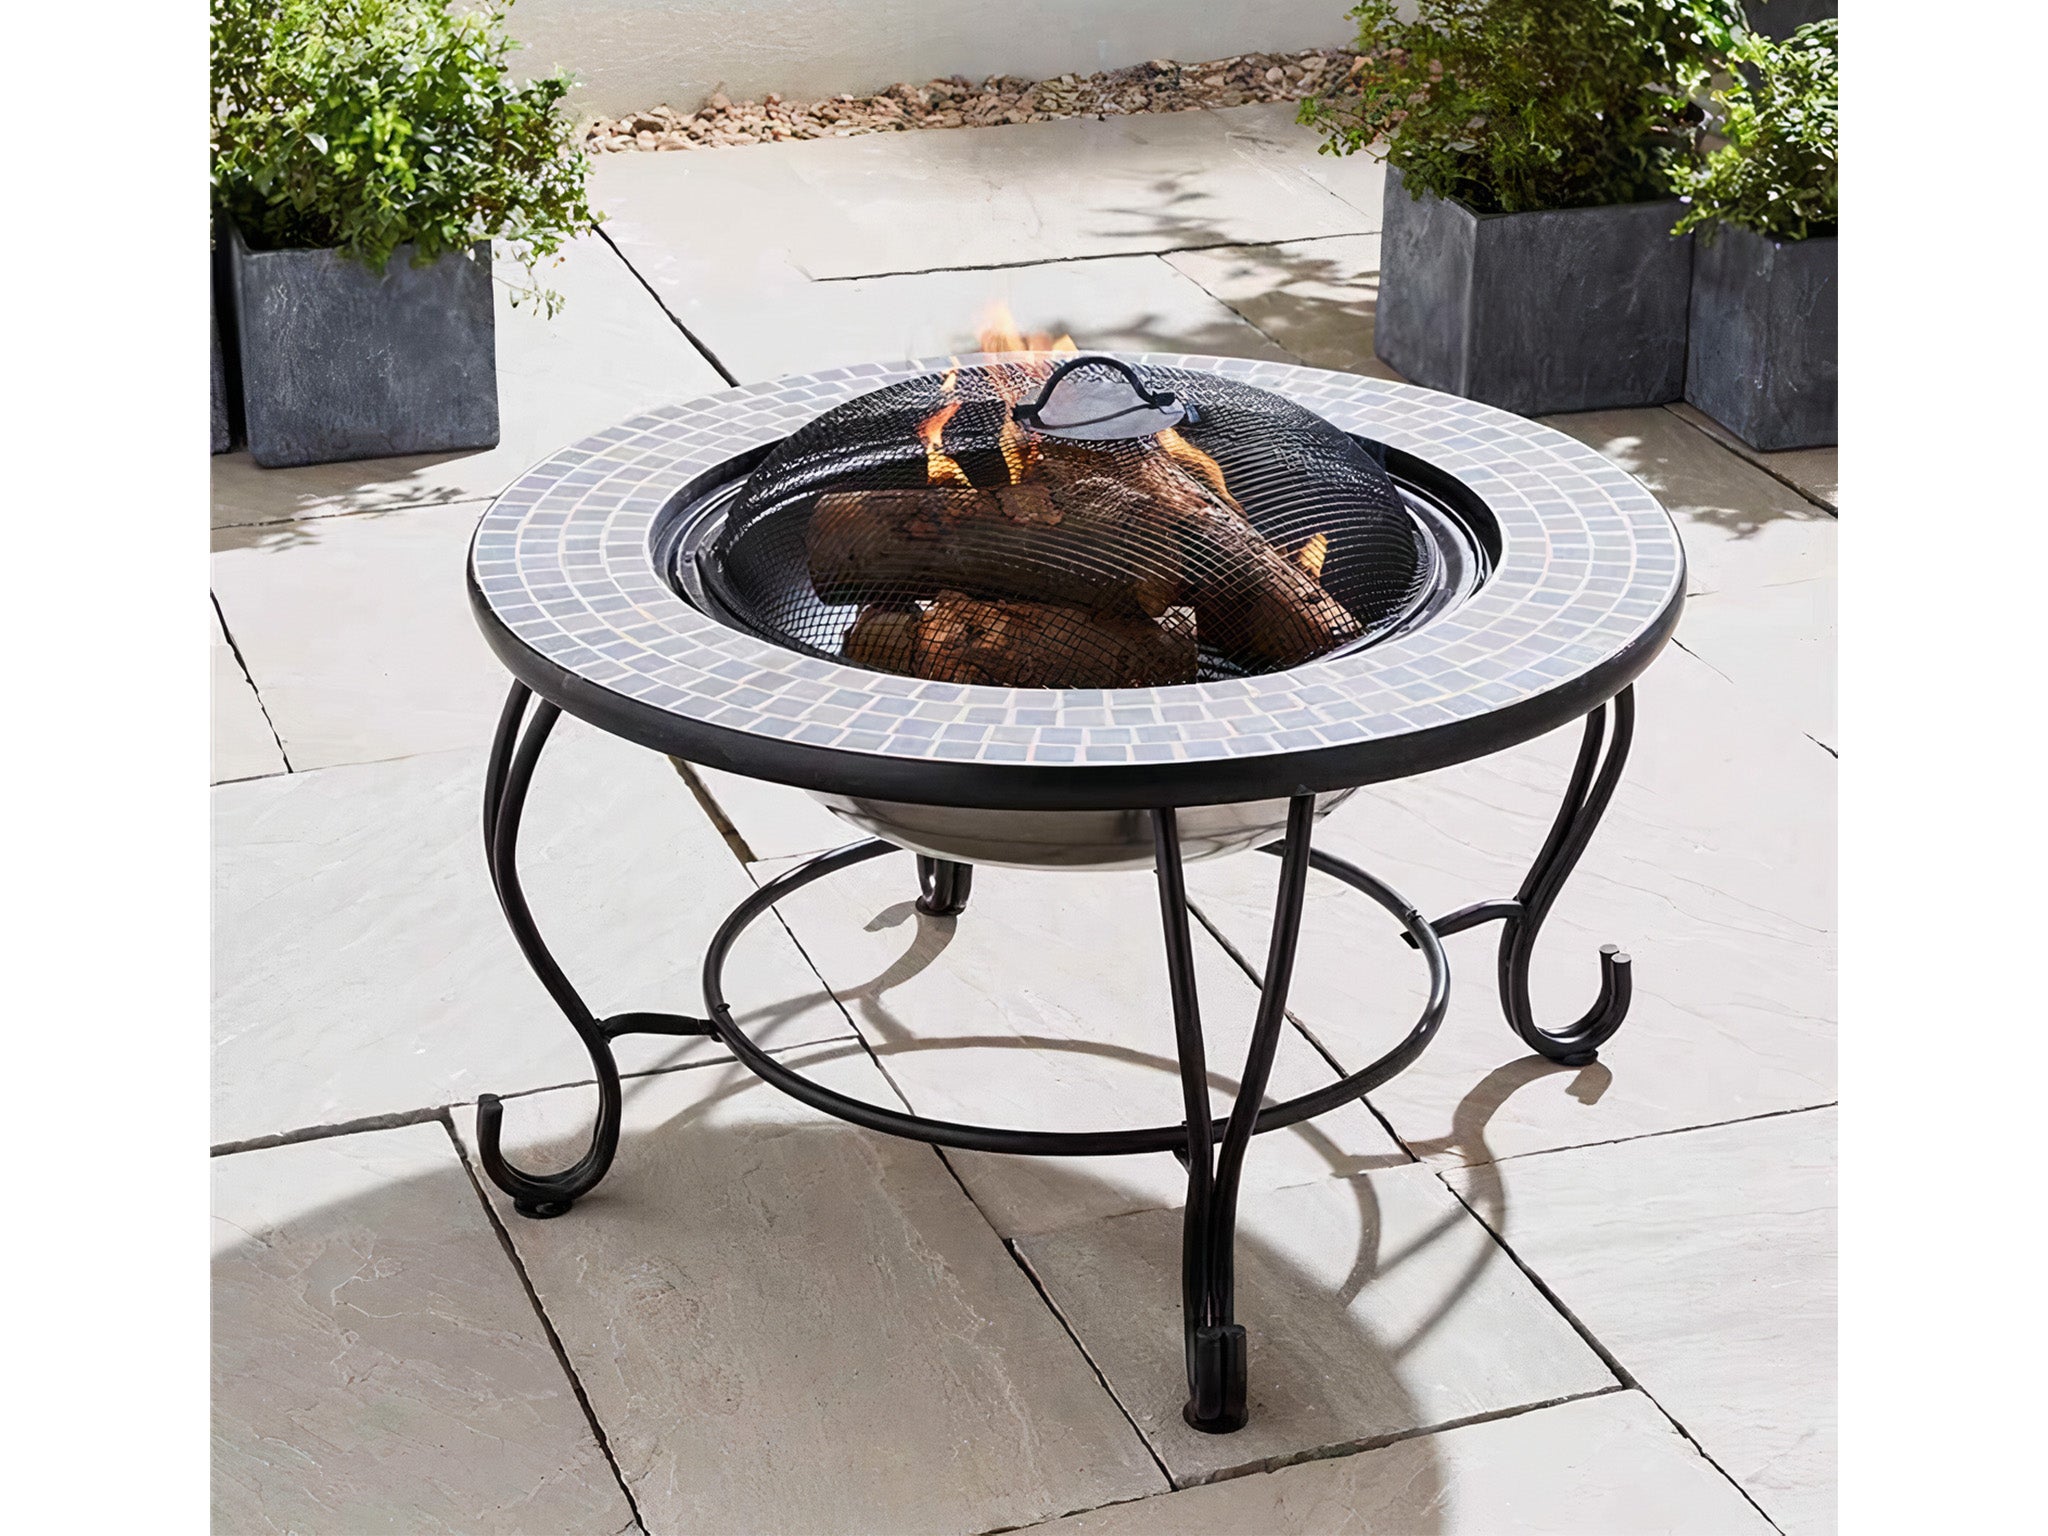 Billy Oh 4 in 1 fire pit